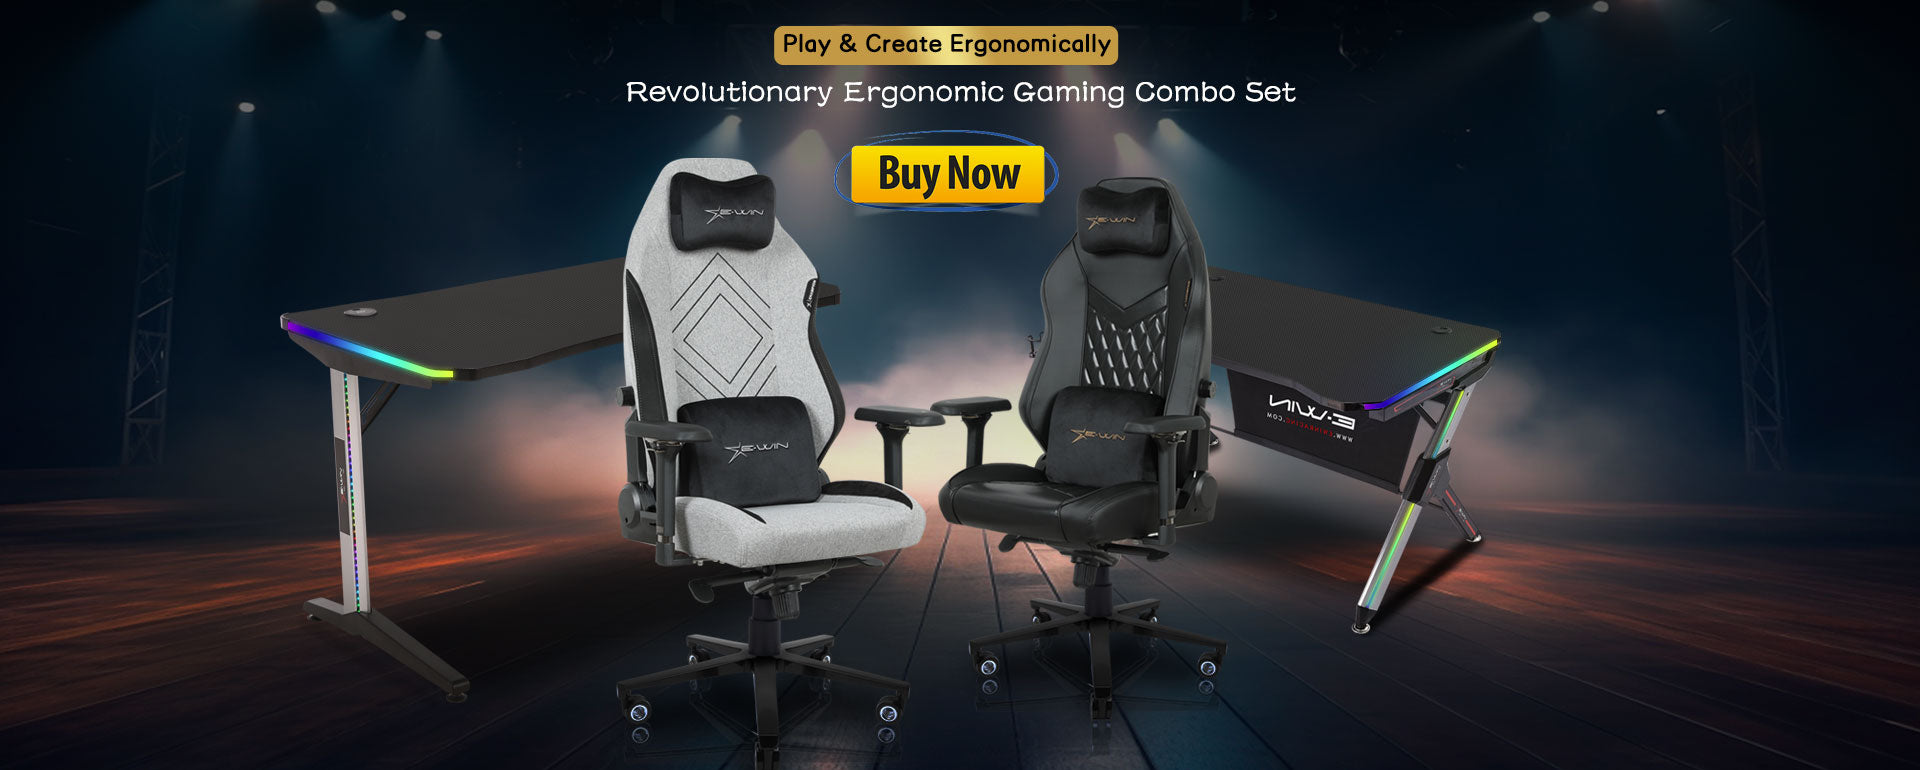 E-WIN Champion Series Revolutionary Upgraded Gaming Chair and RGB Gaming Desk Bundle Set